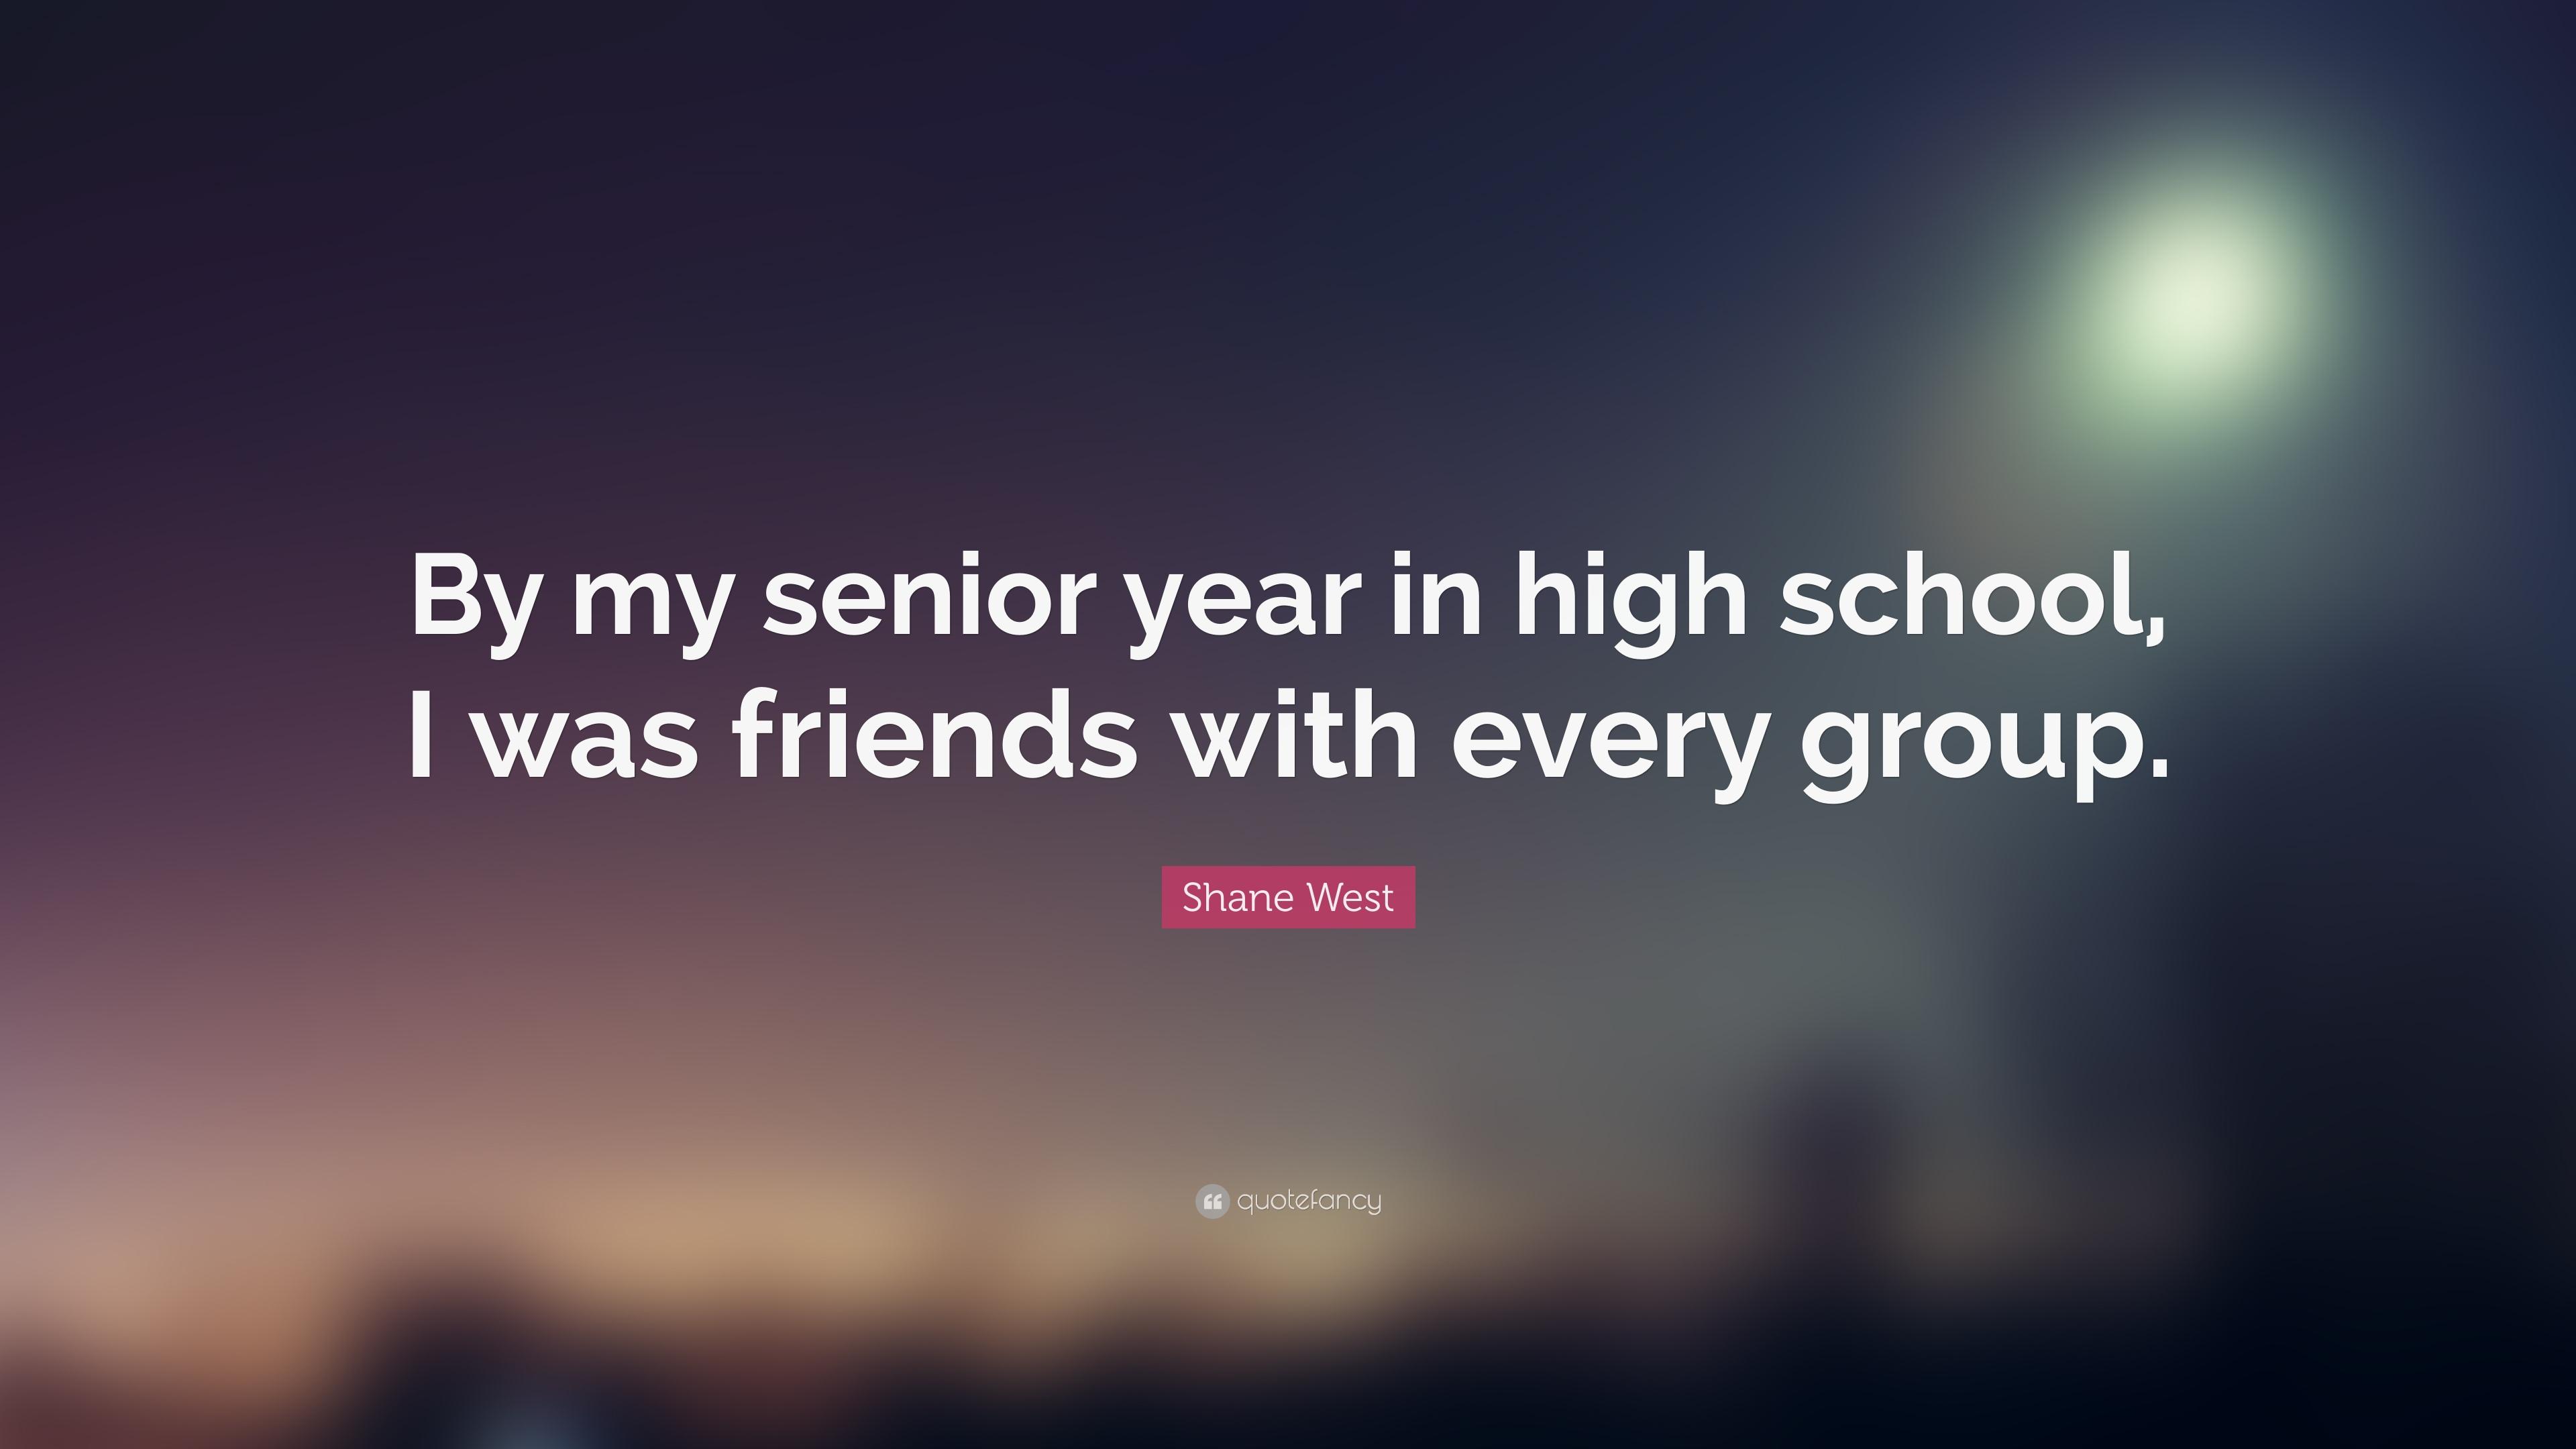 Shane West Quote: “By my senior year in high school, I was friends